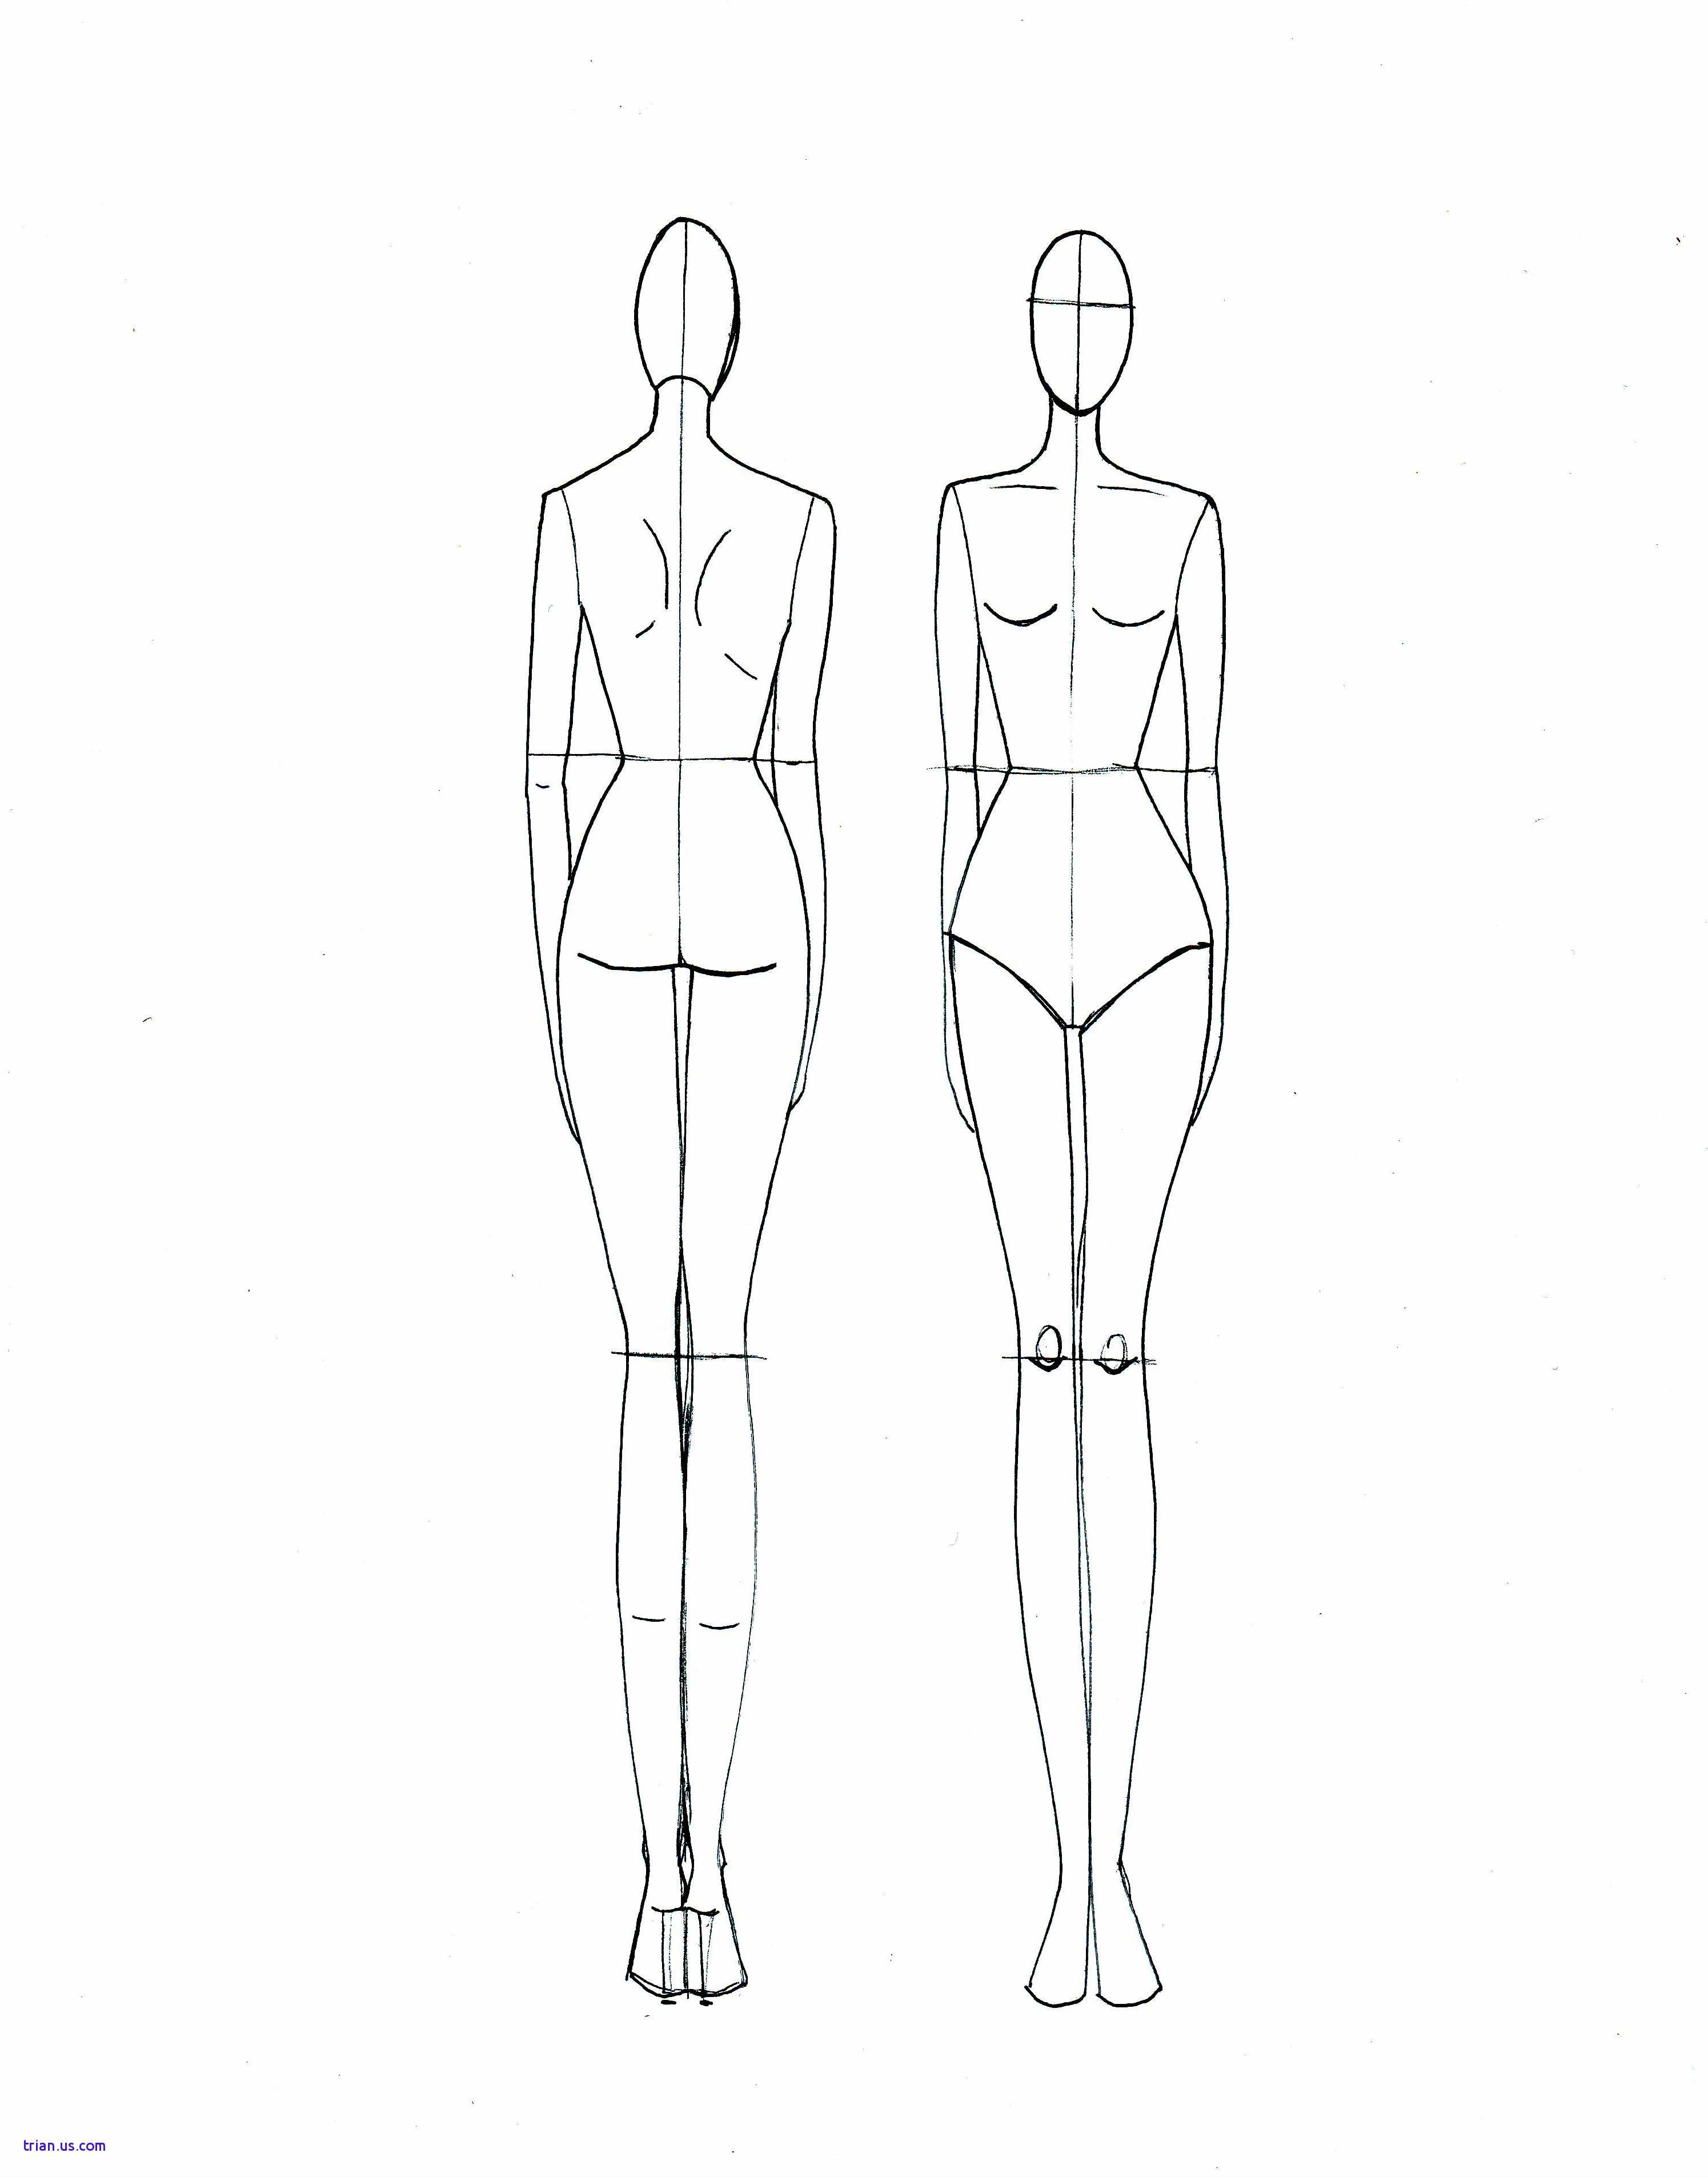 7 Drawing Template Back Model For Free Download On Ayoqq - Free Printable Fashion Model Templates